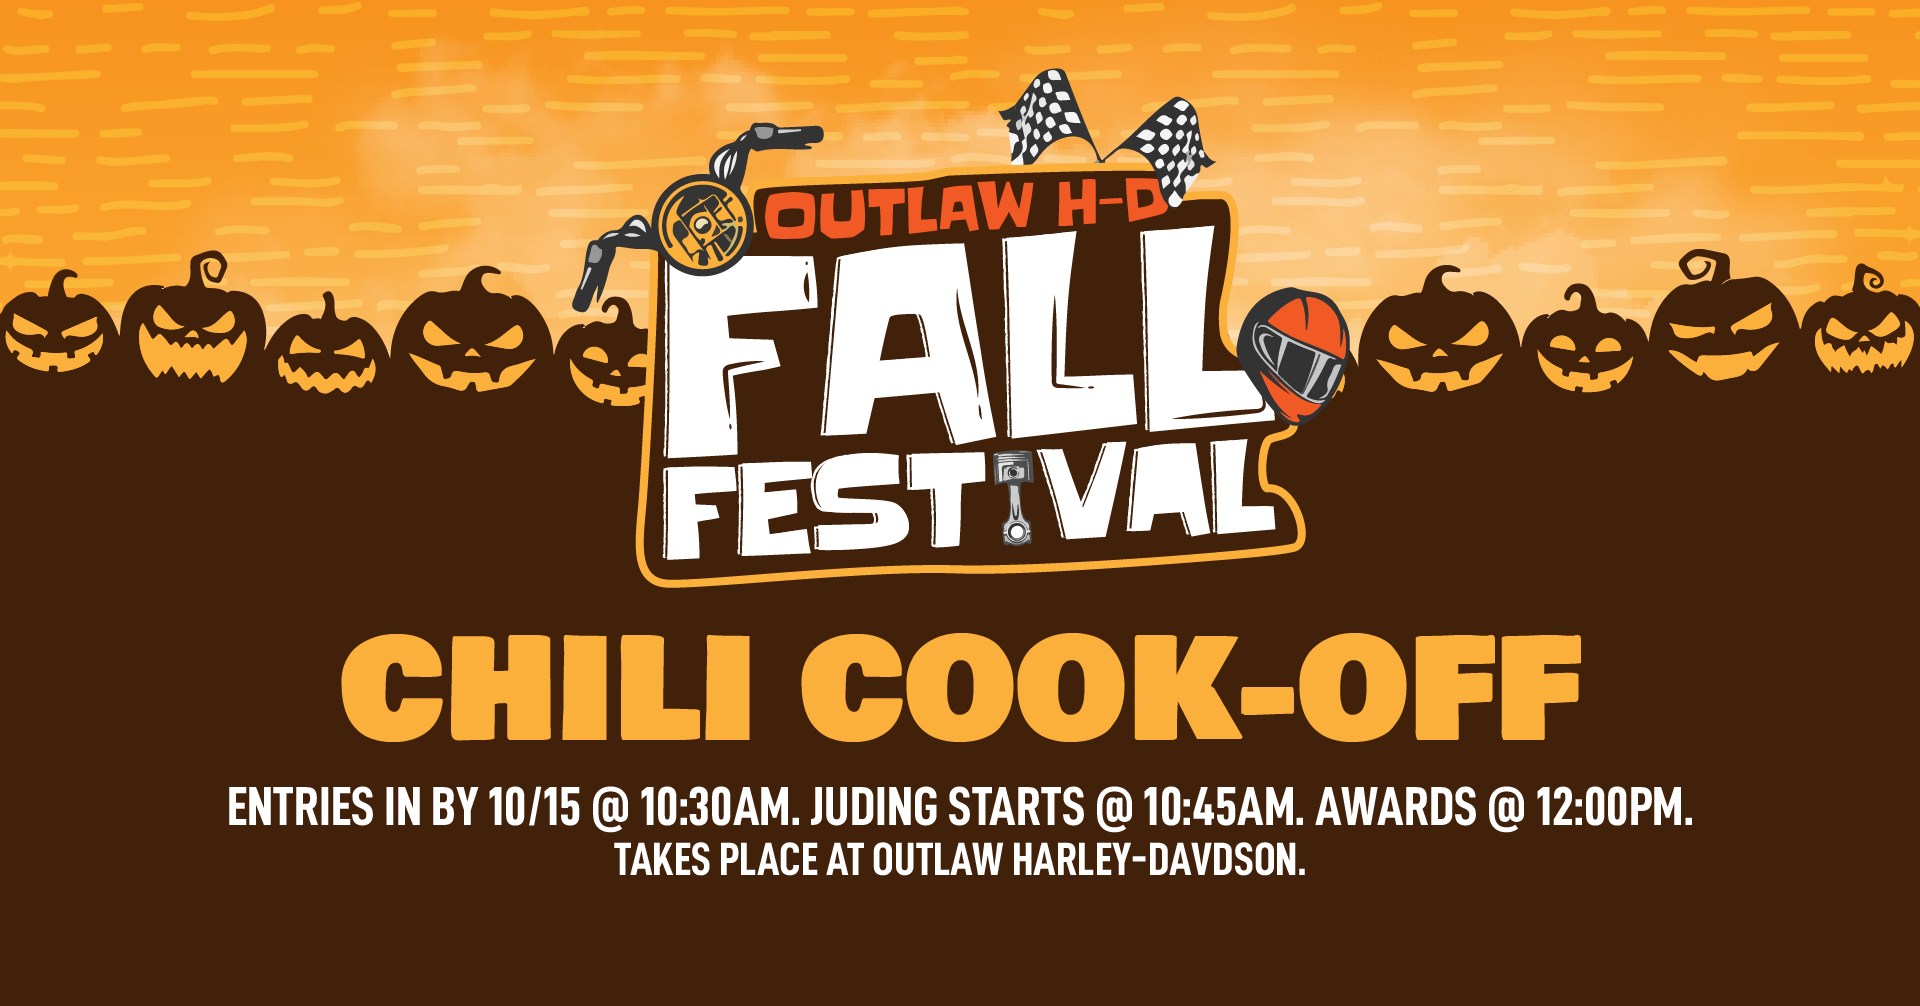 Outlaw HarleyDavidson® Fall Festival Chili CookOff